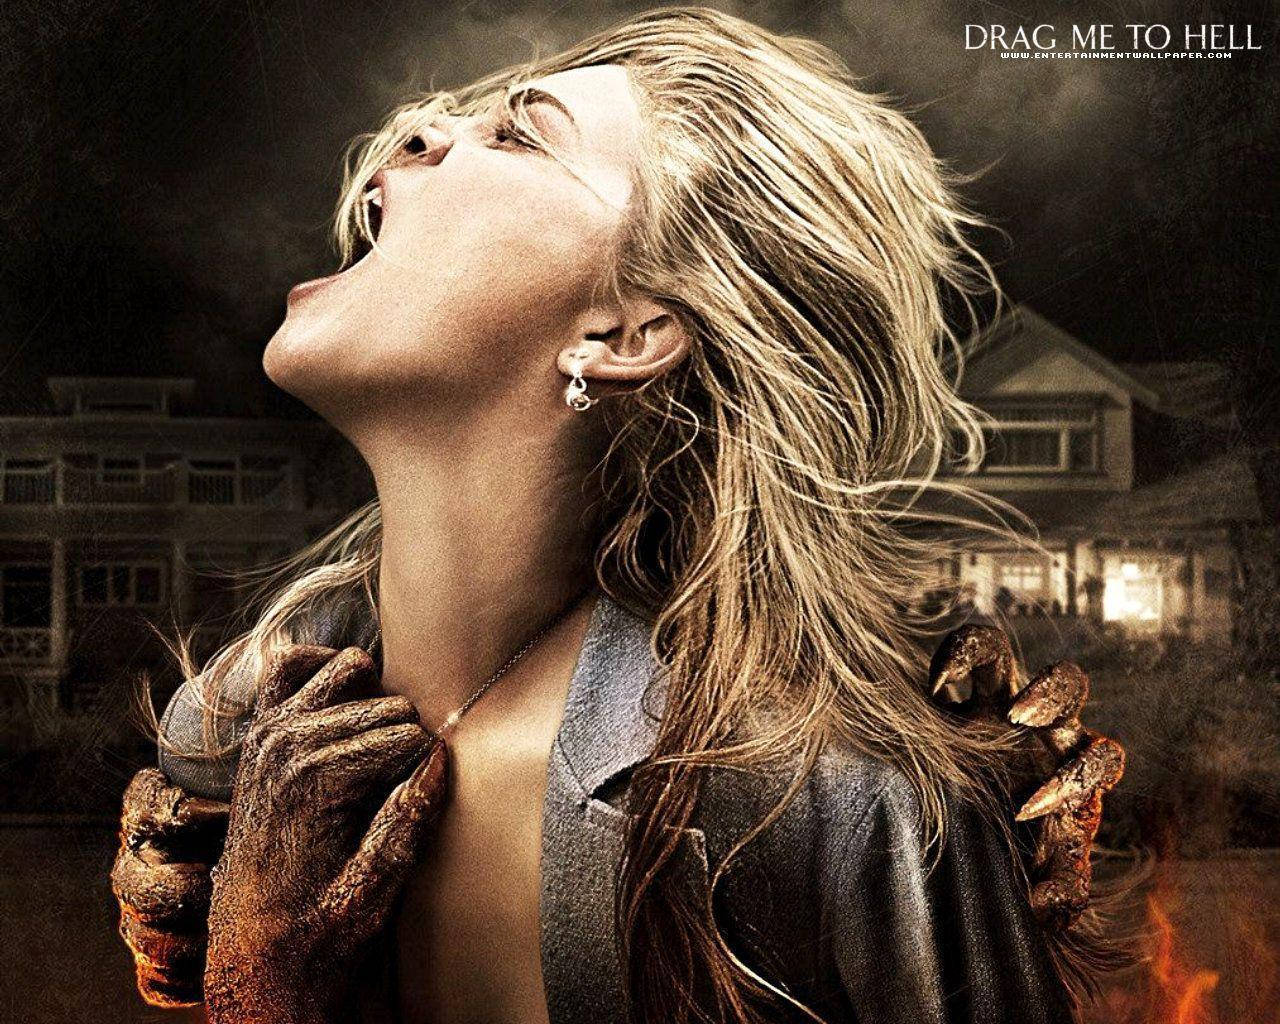 Horror Movie Drag Me To Hell Wallpaper